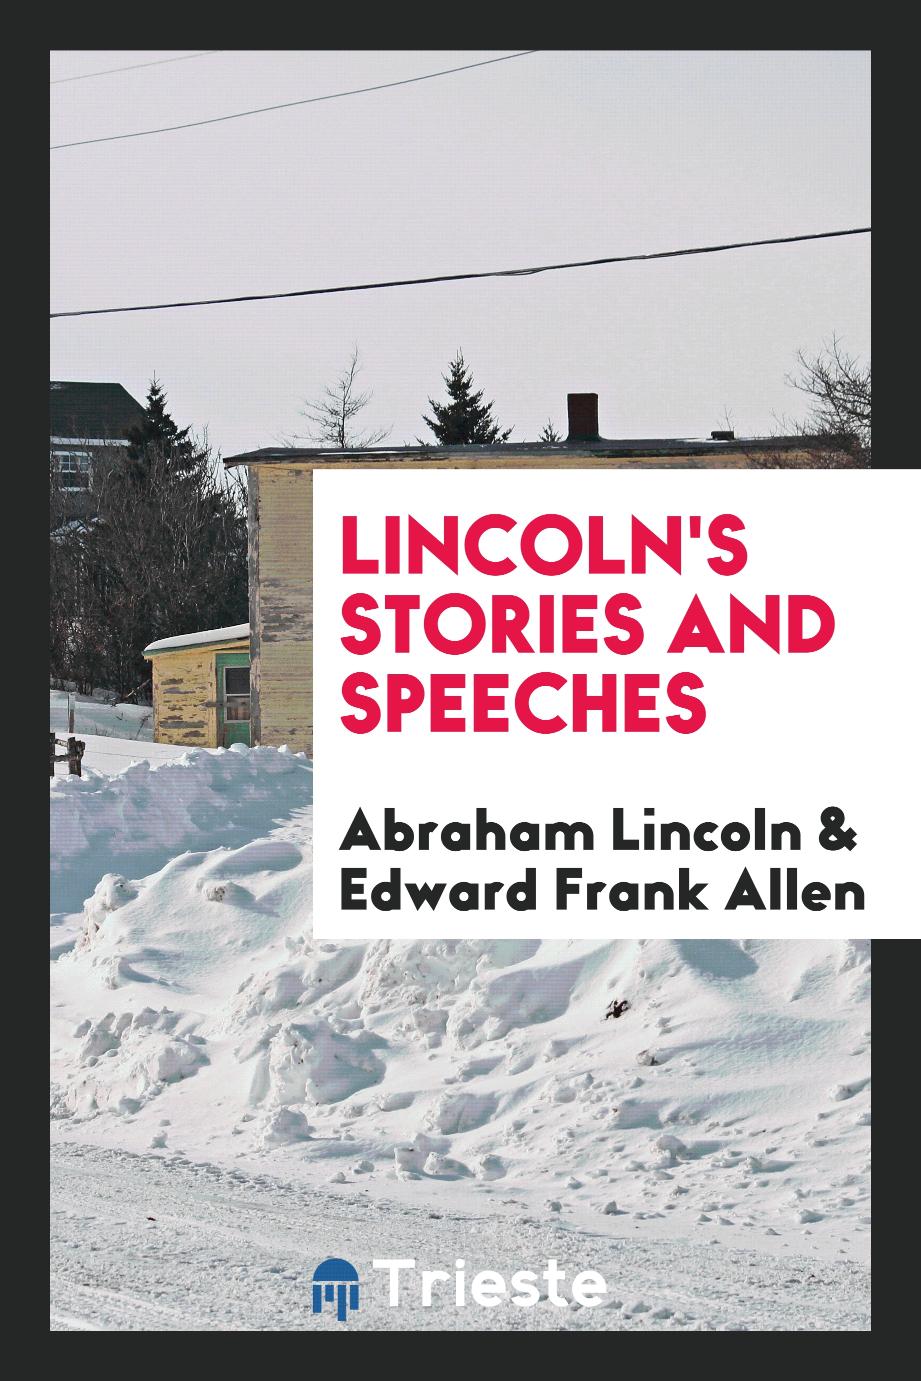 Lincoln's stories and speeches